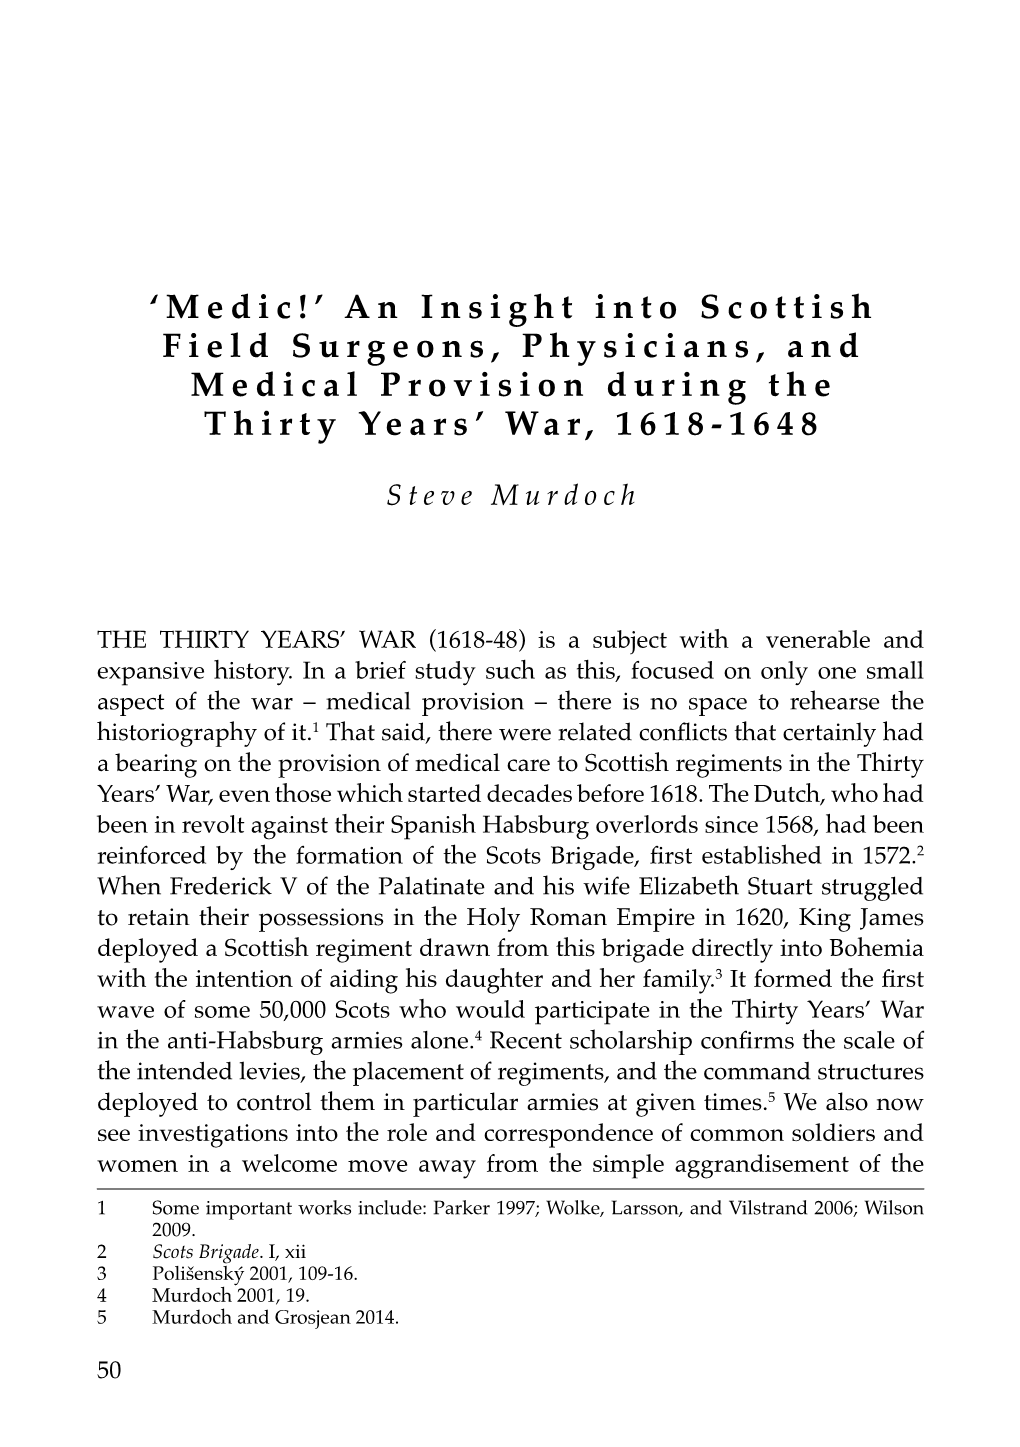 An Insight Into Scottish Field Surgeons, Physicians, and Medical Provision During the Thirty Years’ War, 1618-1648